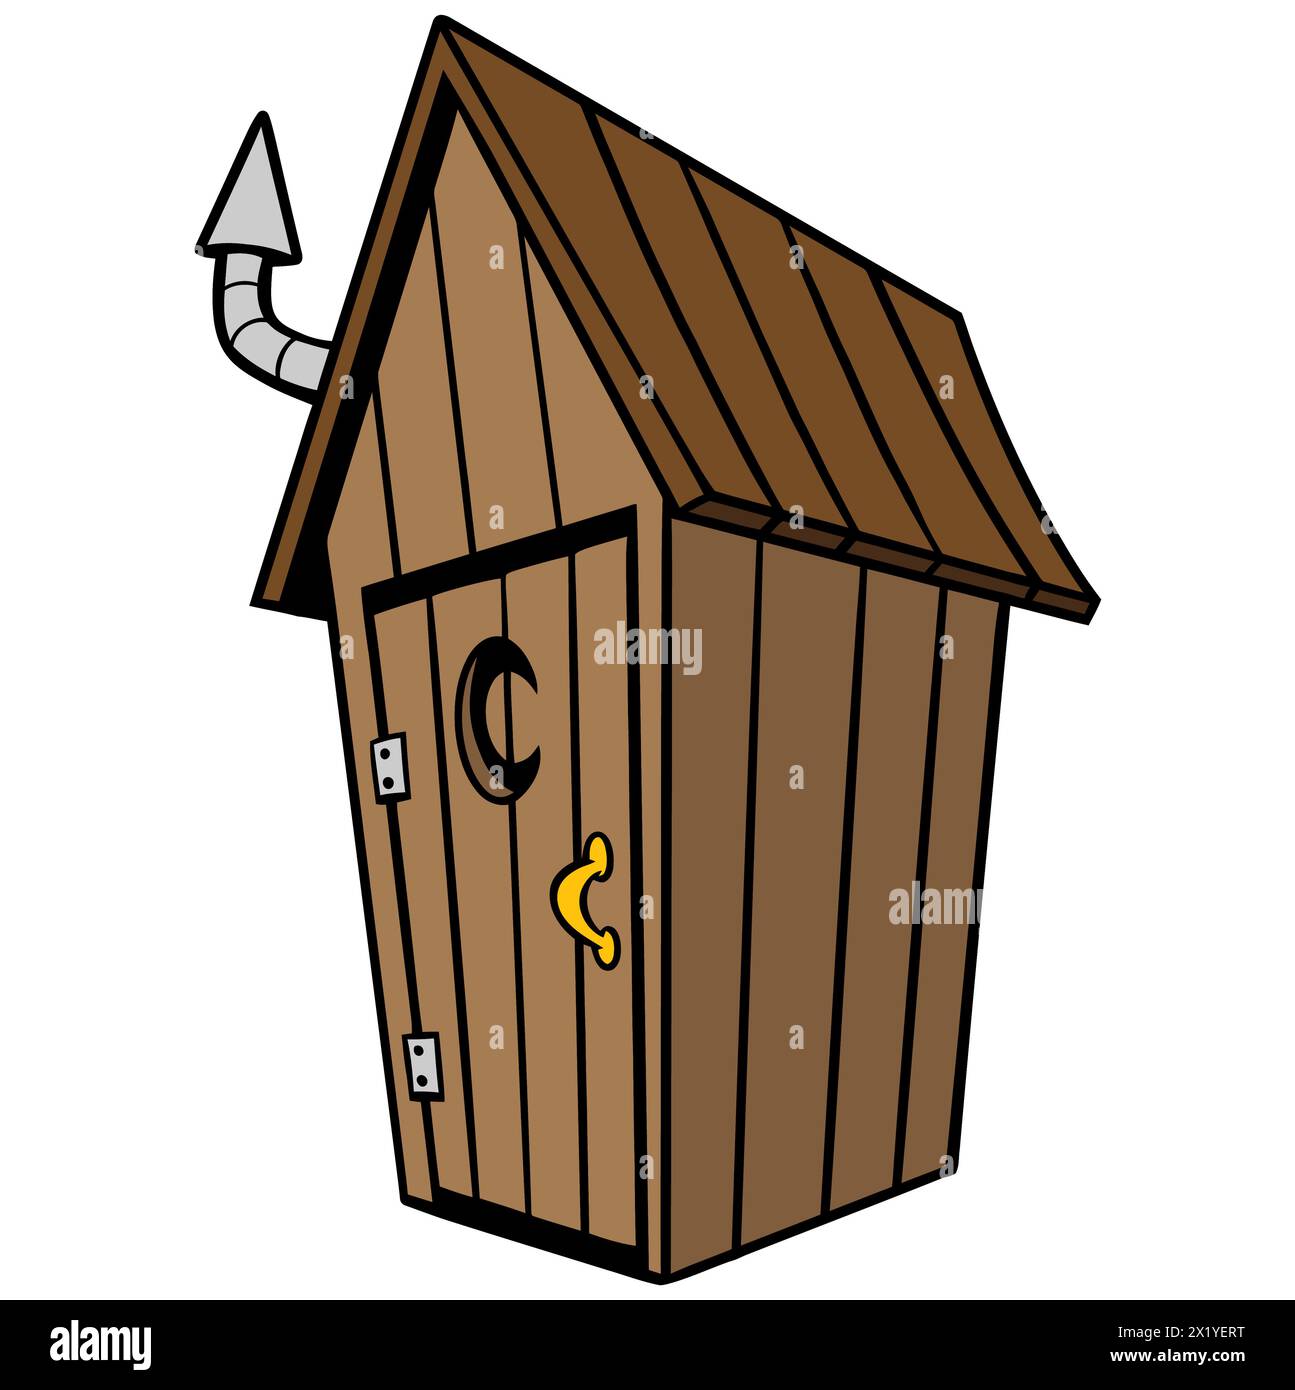 Outhouse - A quaint rustic backyard Outhouse. Stock Vector